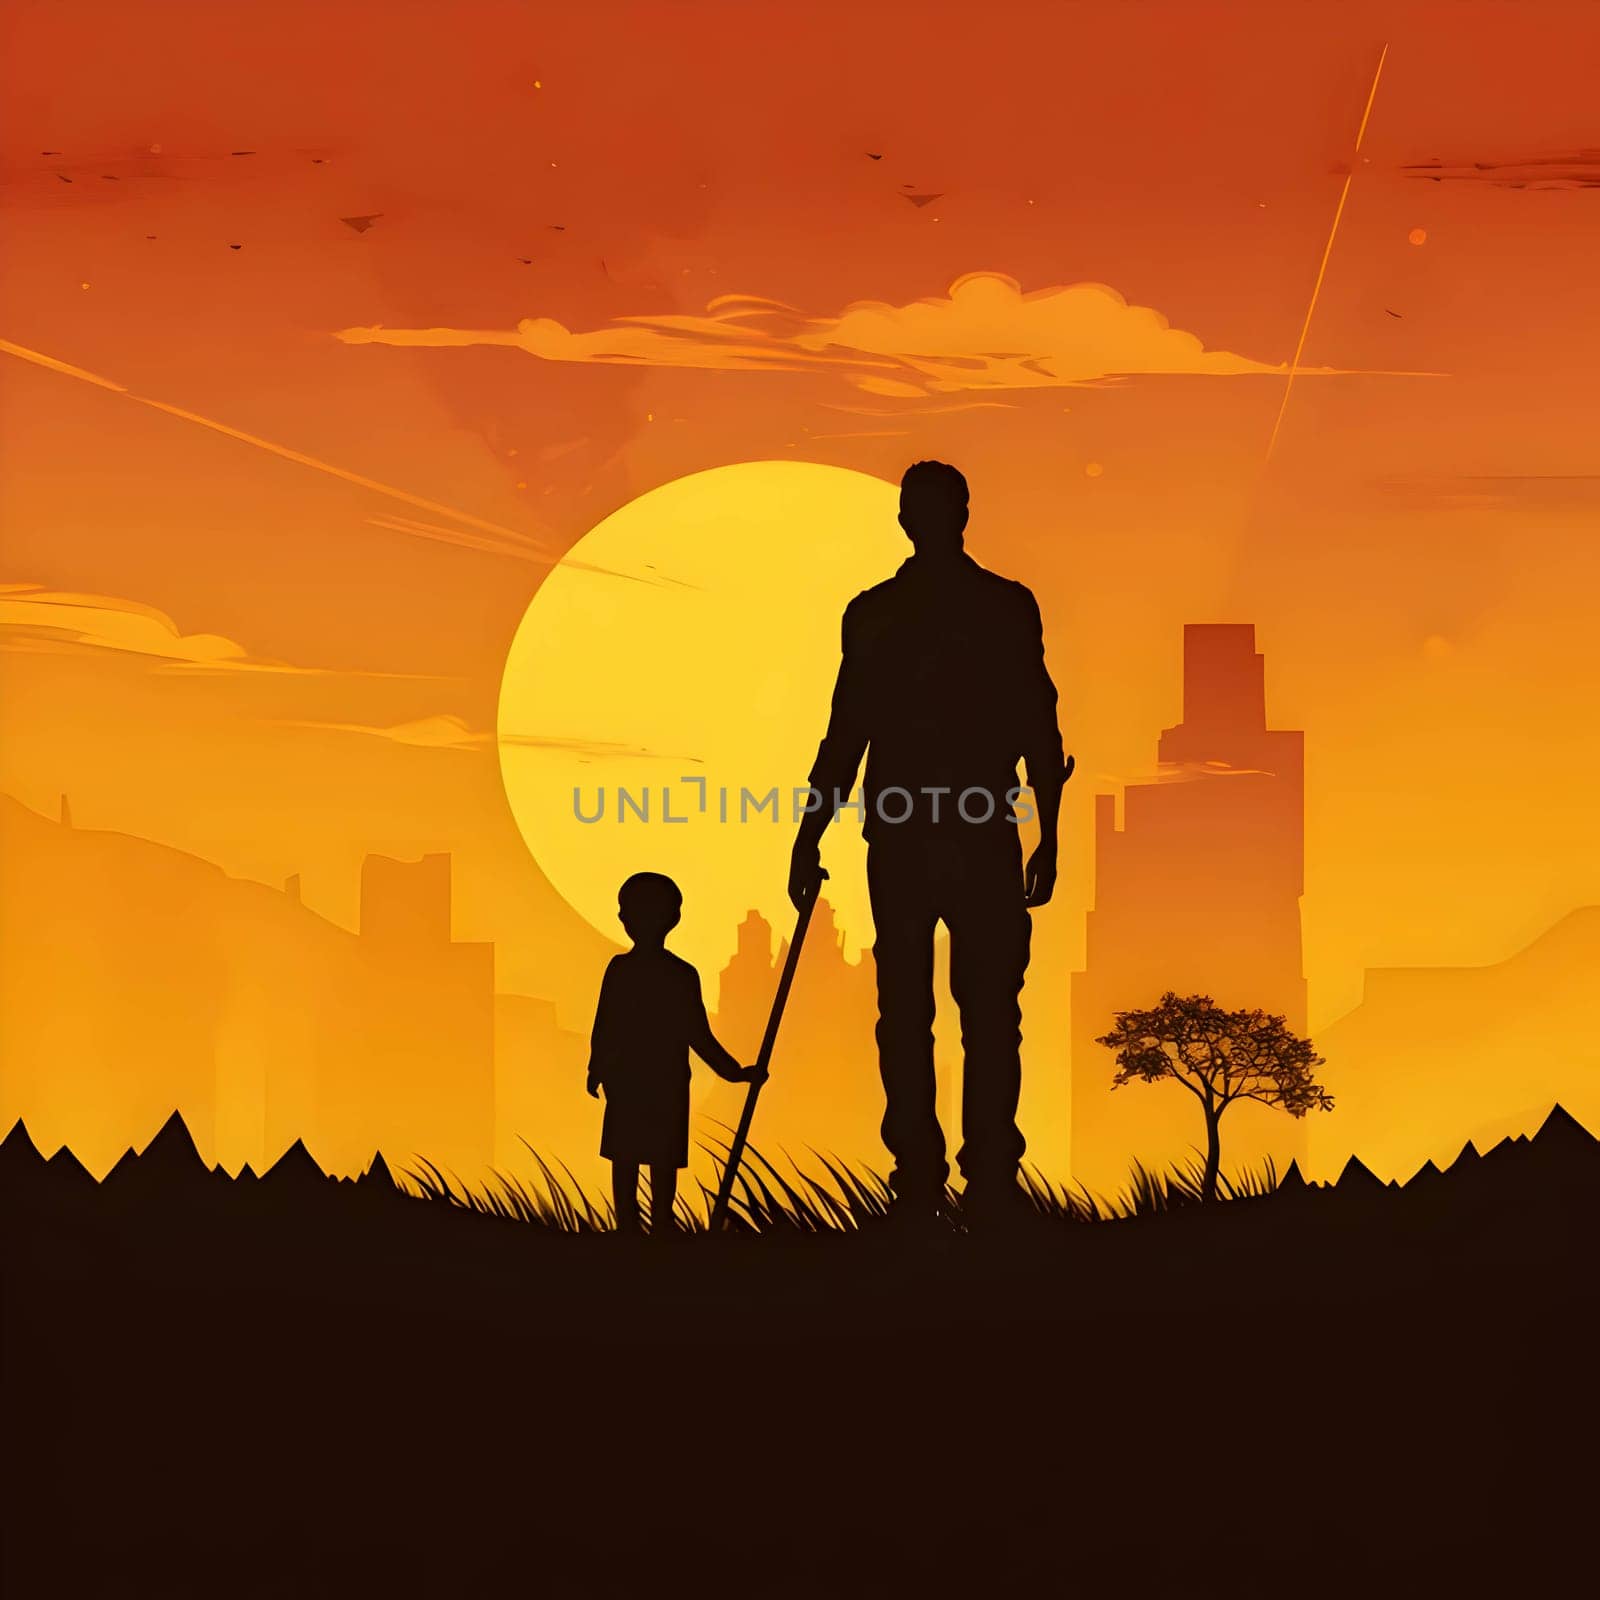 Vector illustration of man and boy in black silhouette against a clean sunset background, capturing graceful forms.